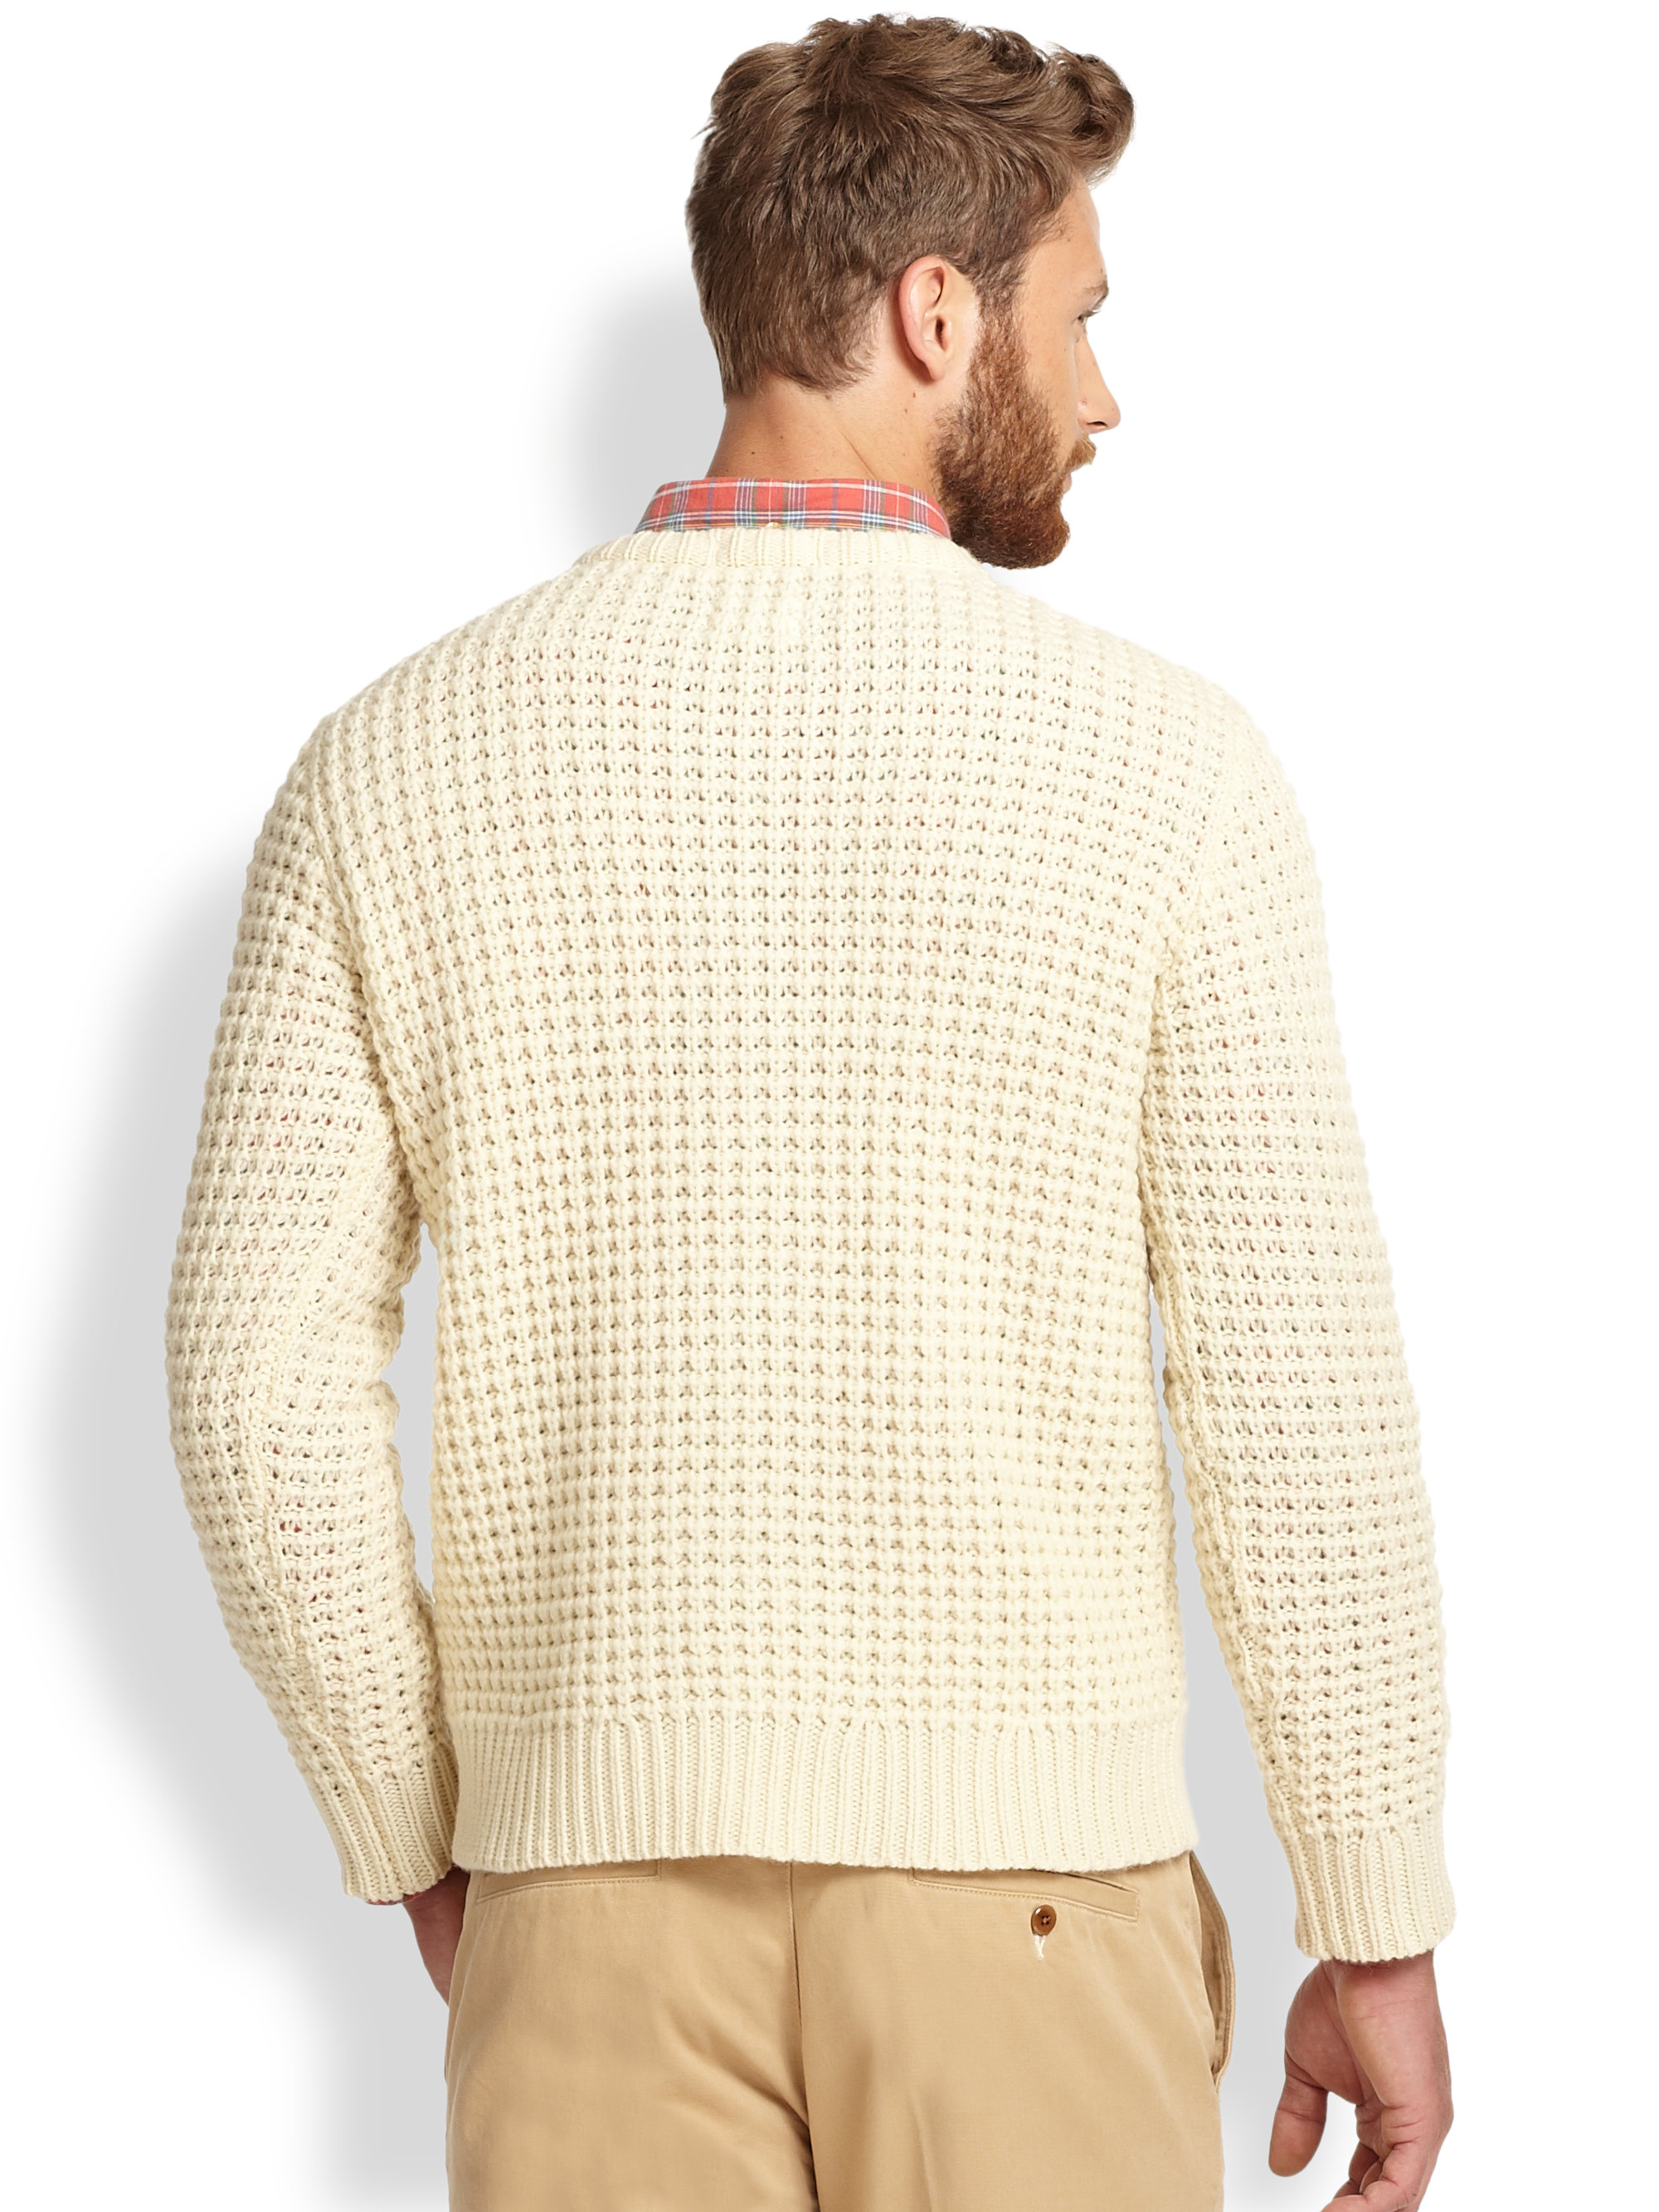 Lyst Gant Rugger Lambswool Cable Knit Sweater In White For Men